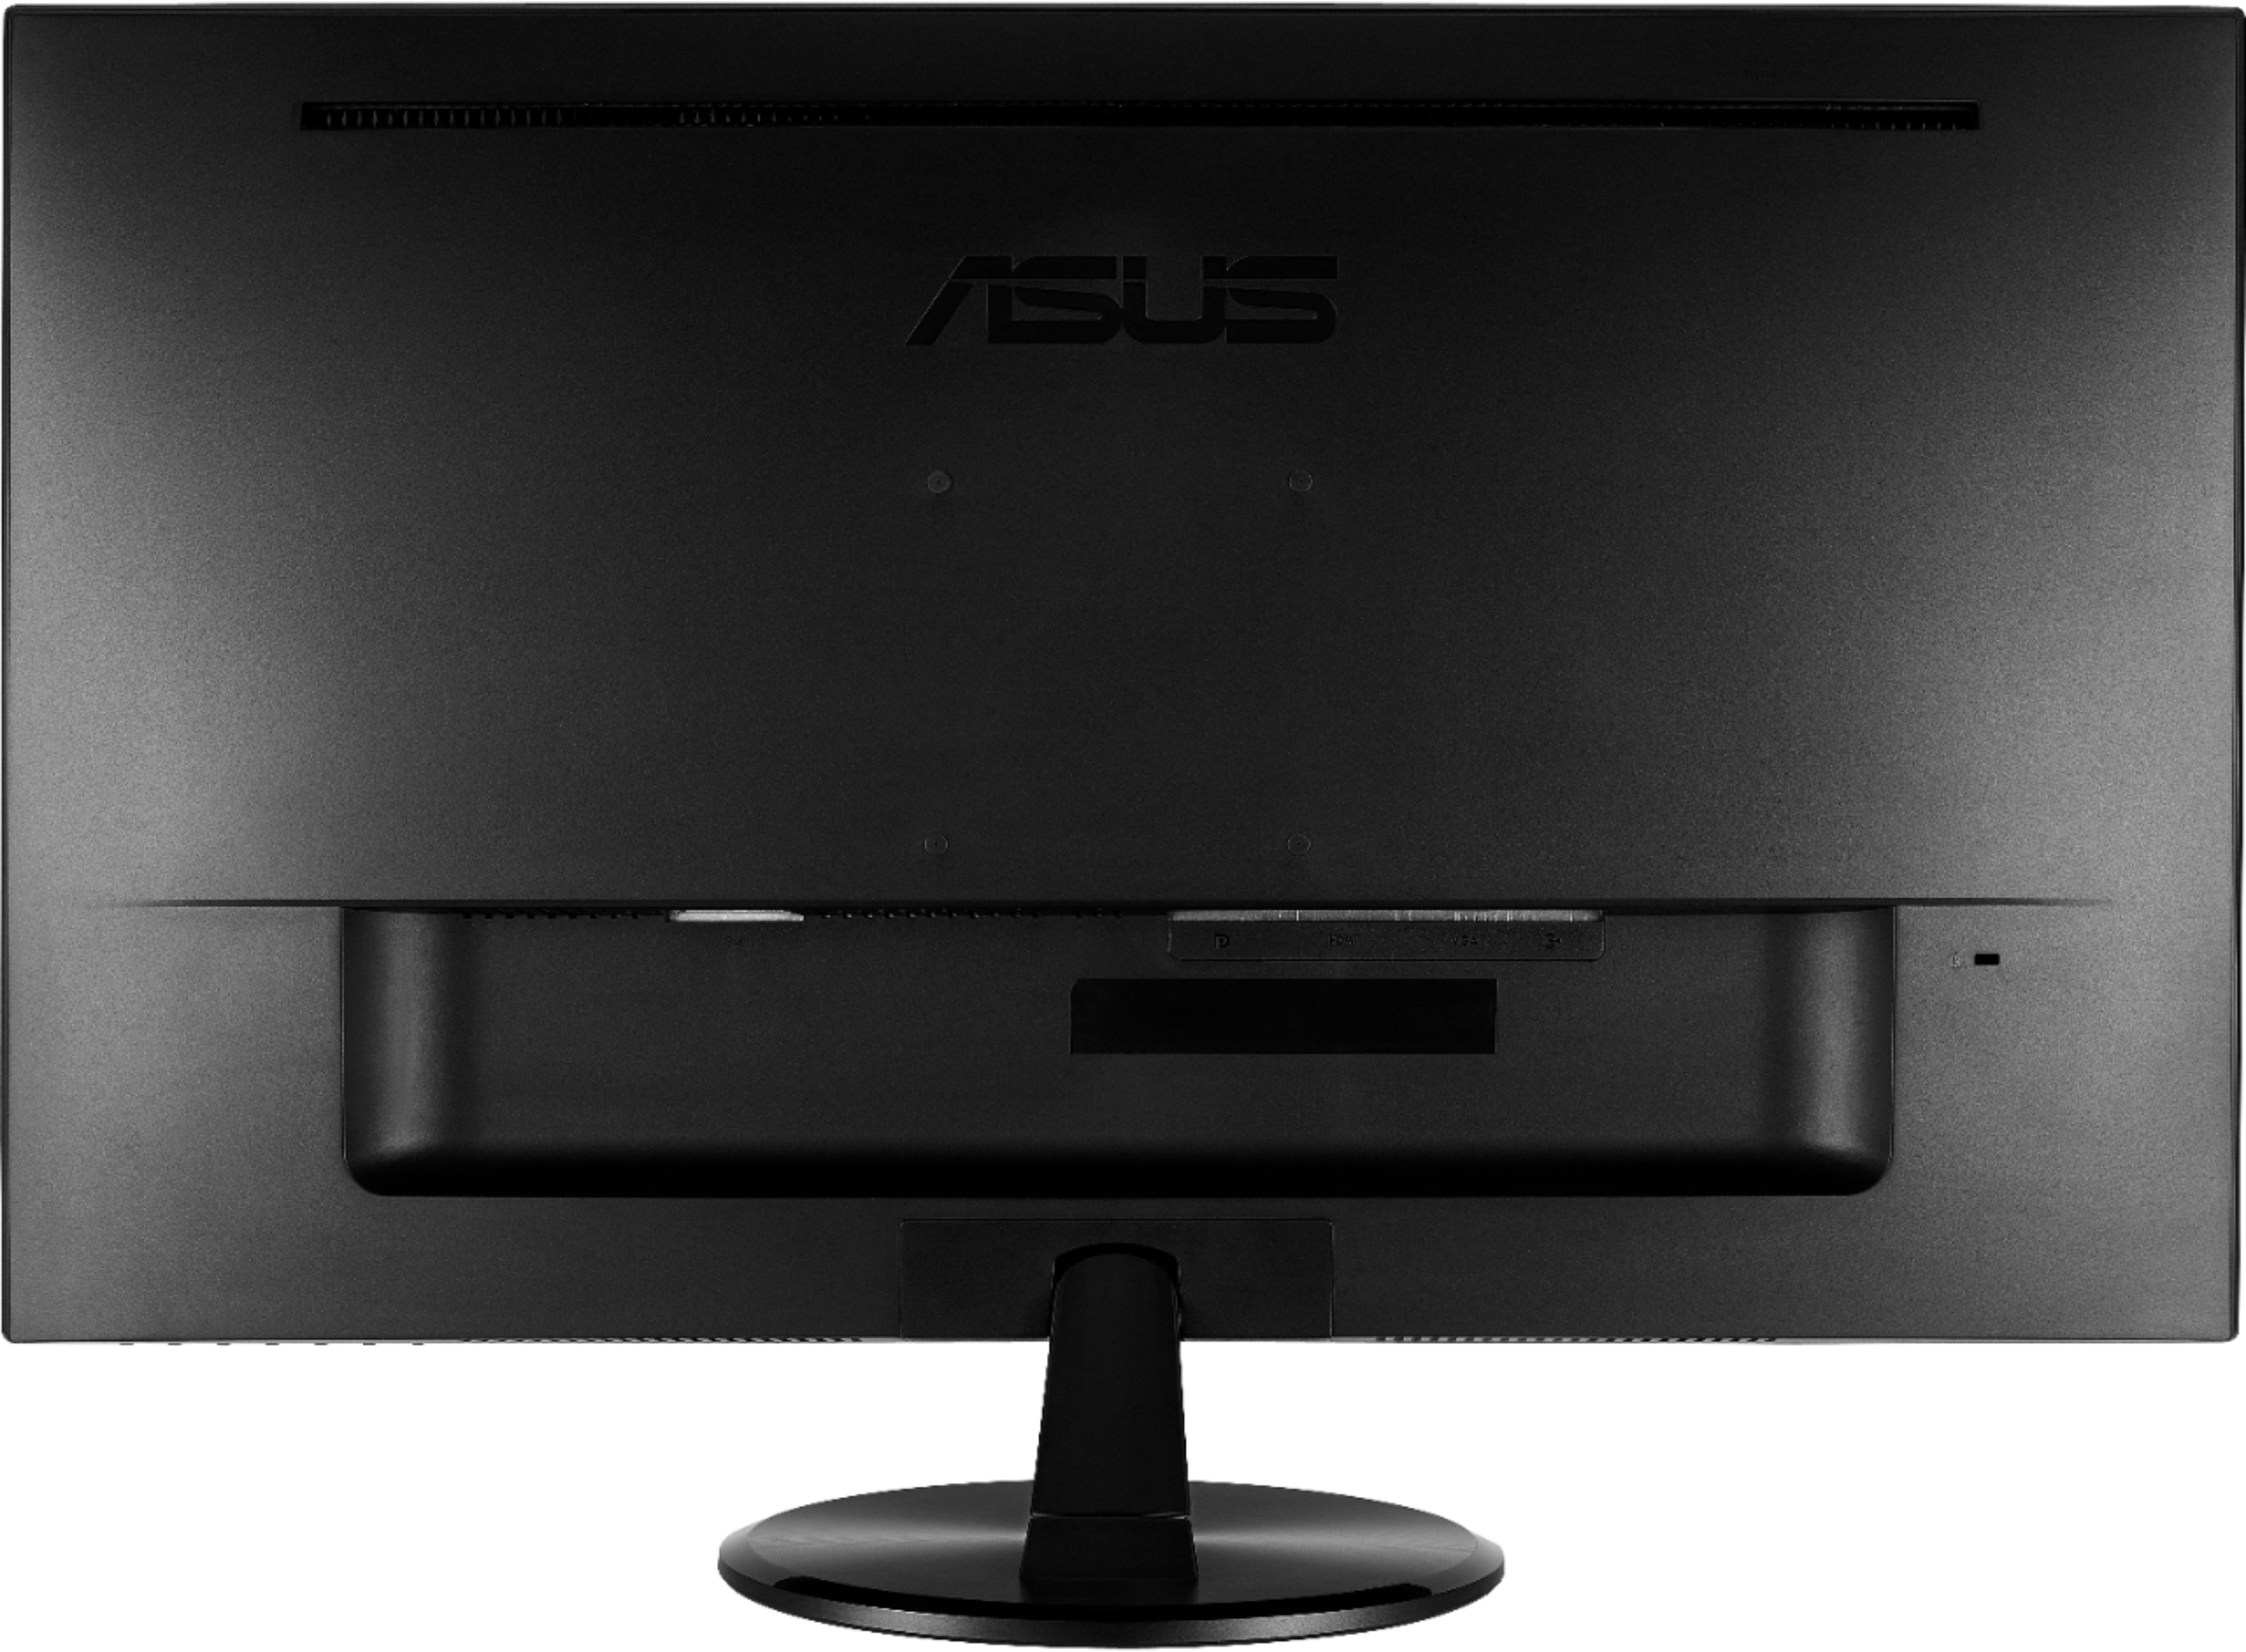 Back View: ASUS - RT-AC1200 V2 AC1200 Dual-Band Wi-Fi Router - Black